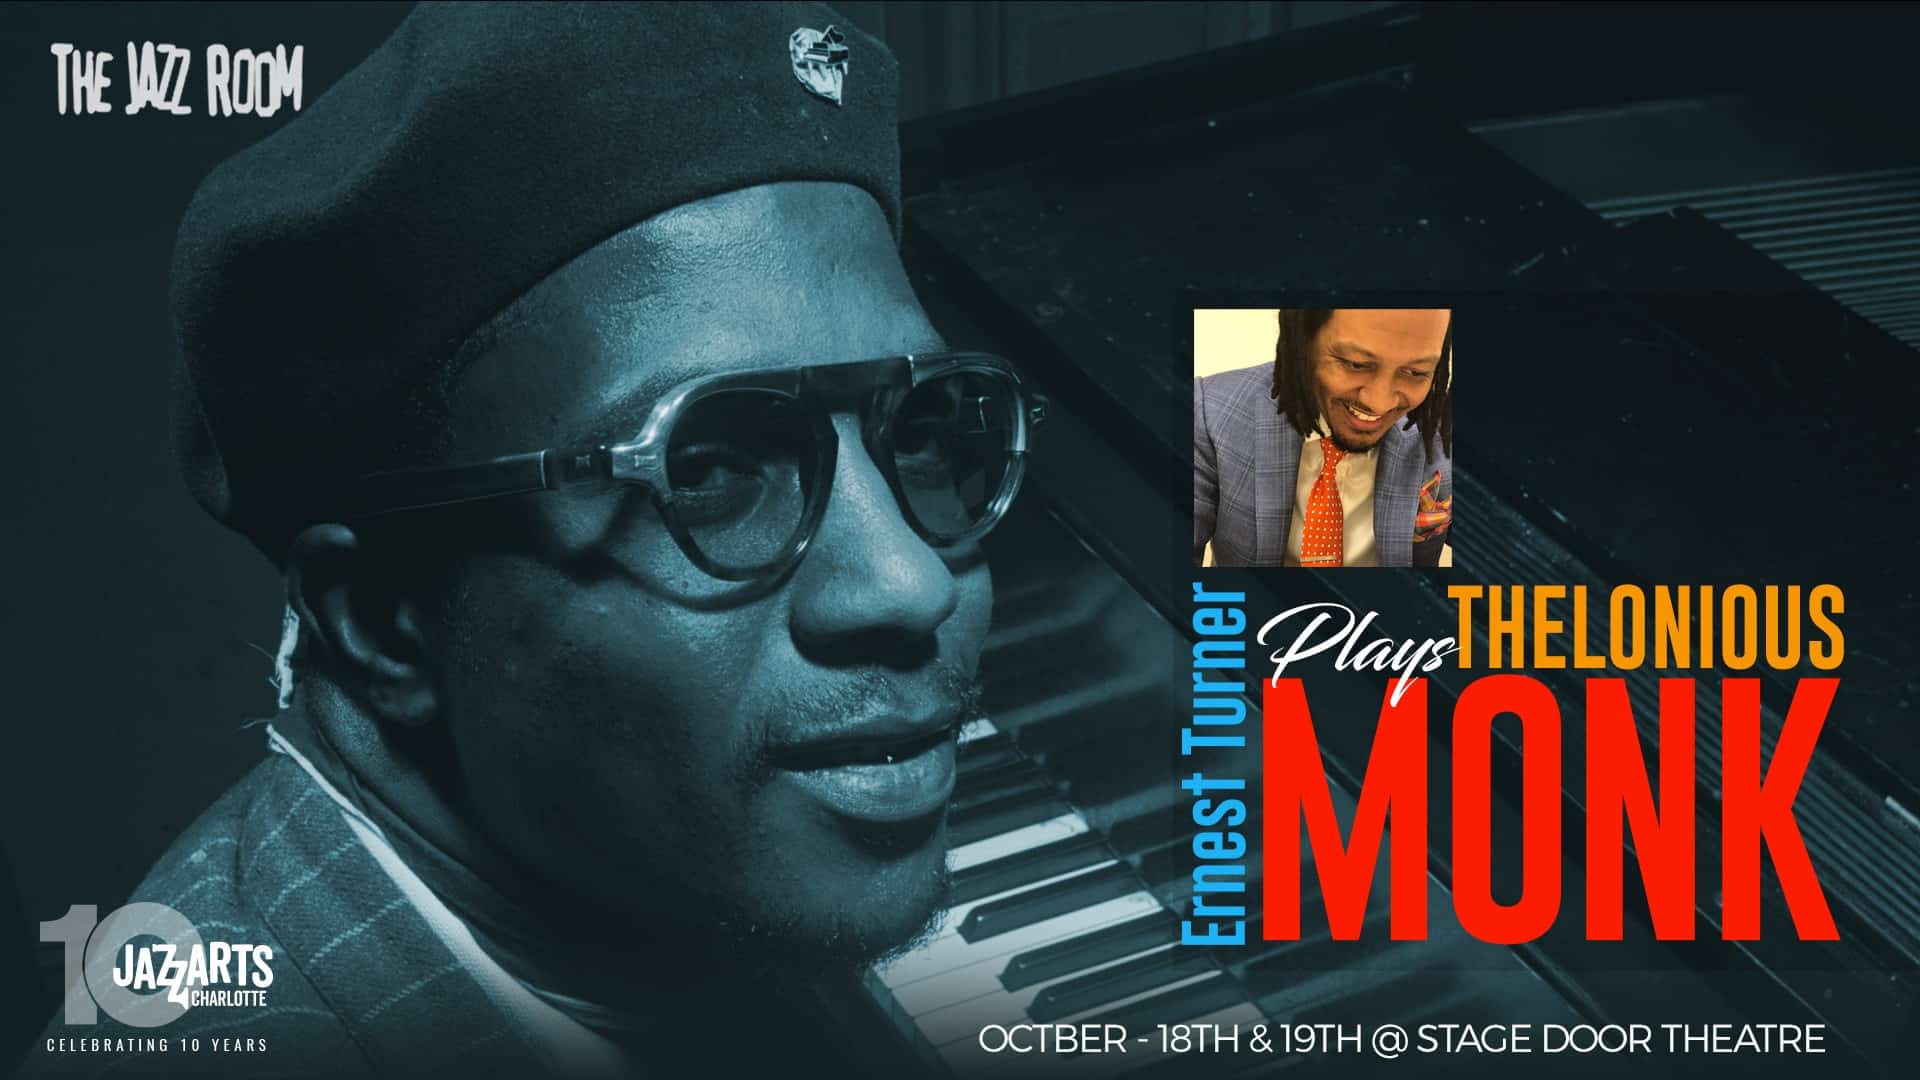 Ernest Turner plays Thelonious Monk